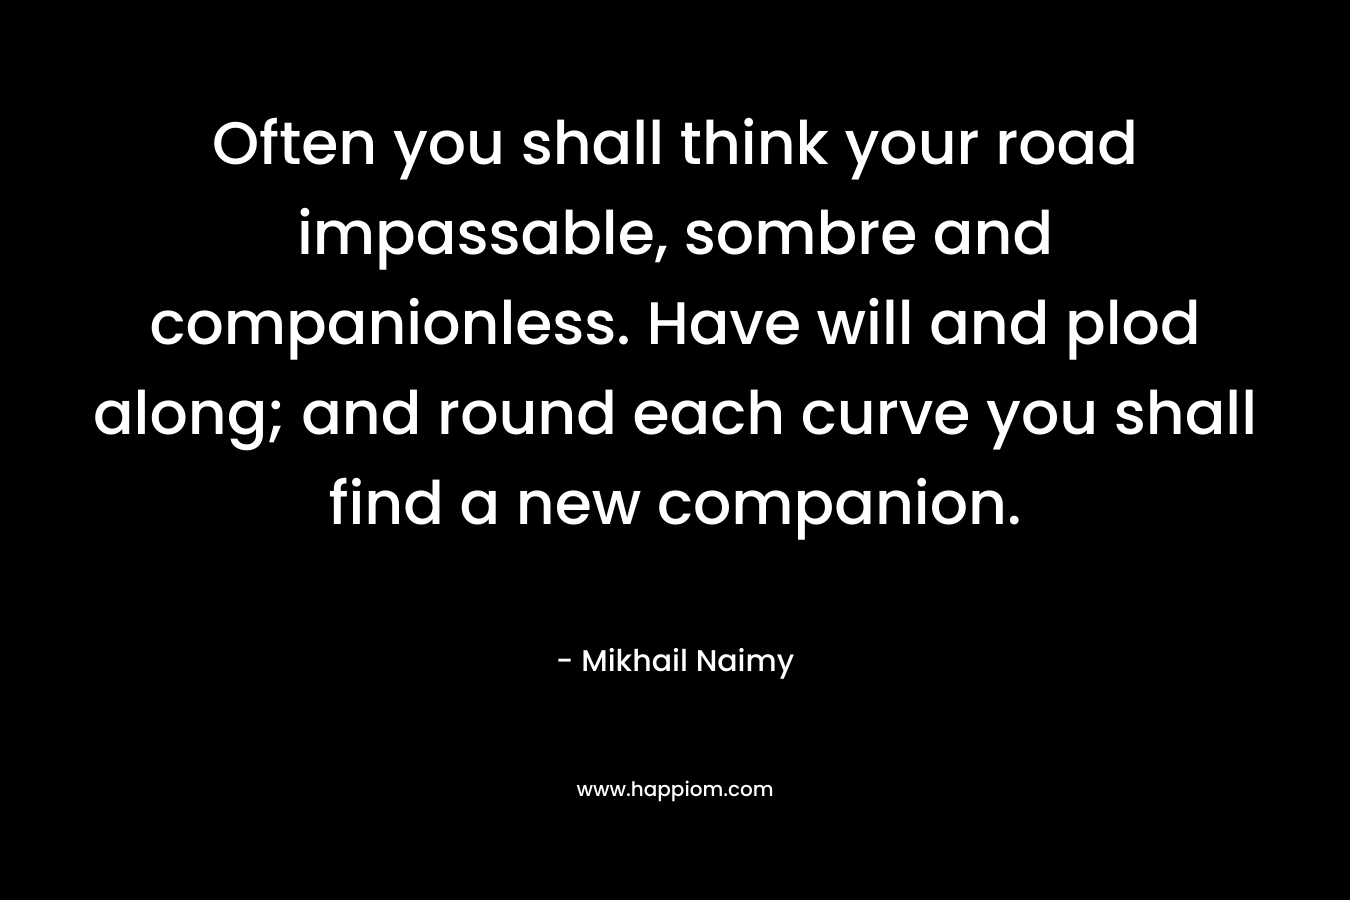 Often you shall think your road impassable, sombre and companionless. Have will and plod along; and round each curve you shall find a new companion. – Mikhail Naimy